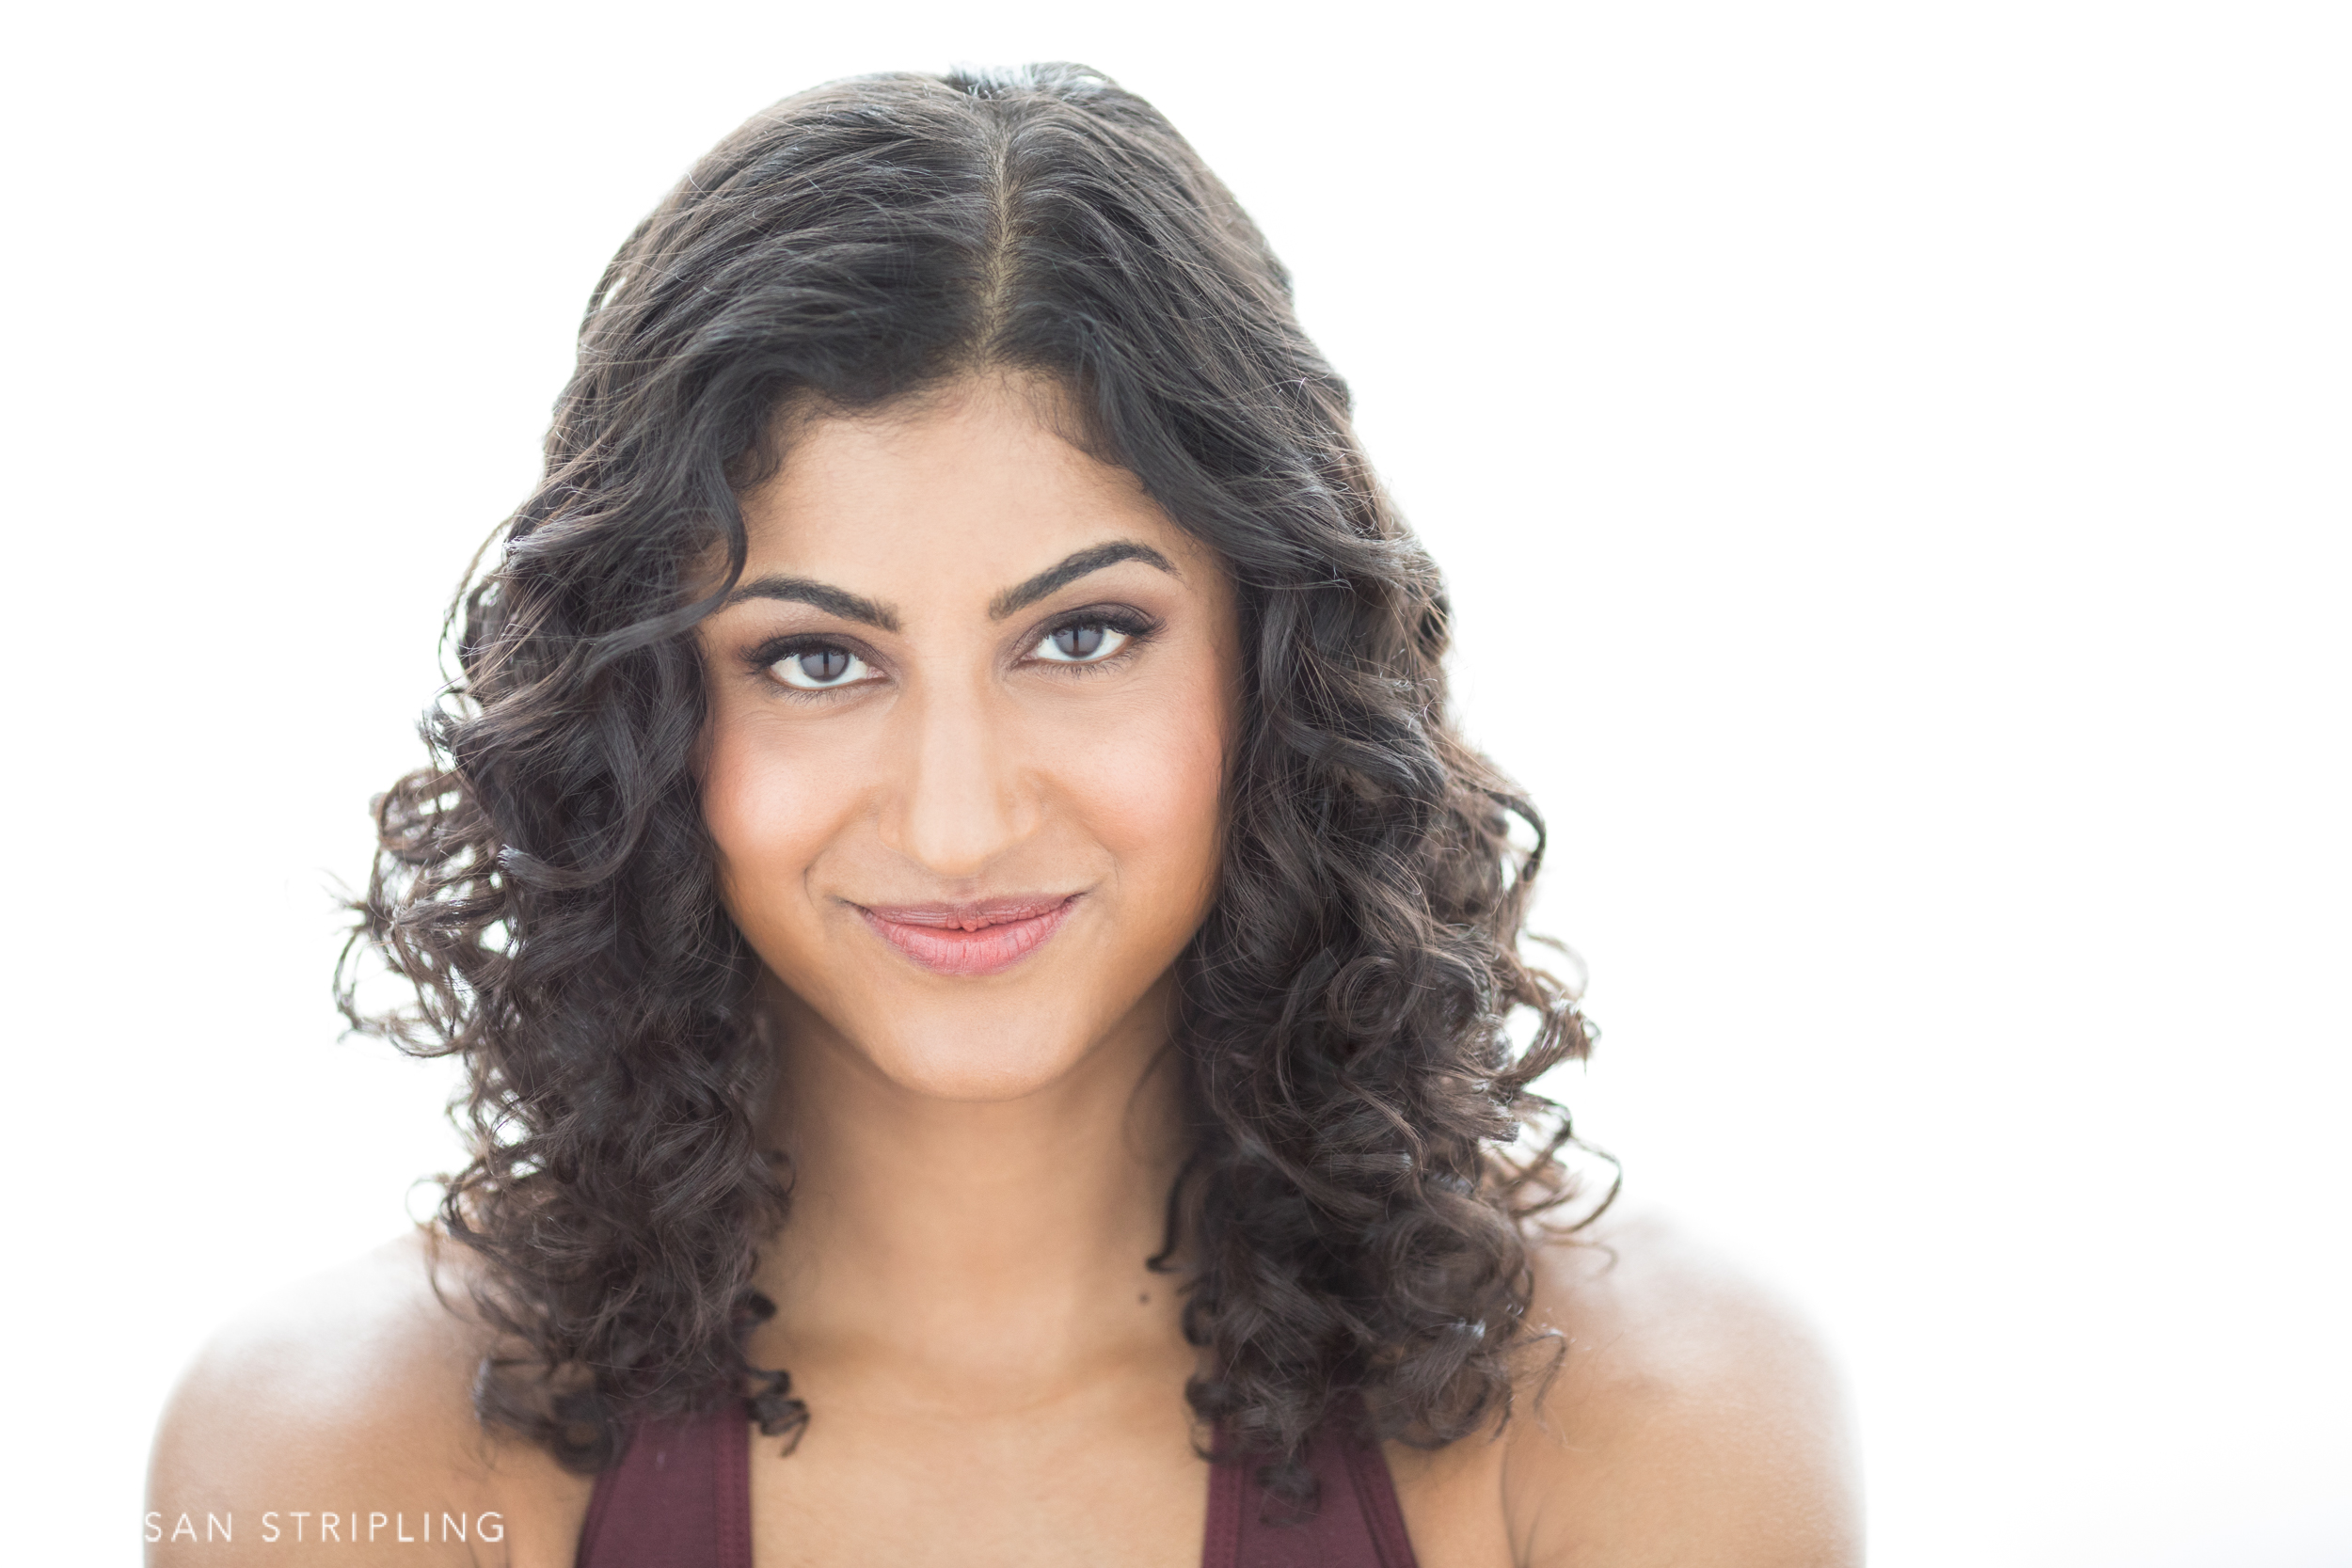 A beautiful woman with curly hair posing for a headshot photo in NYC.